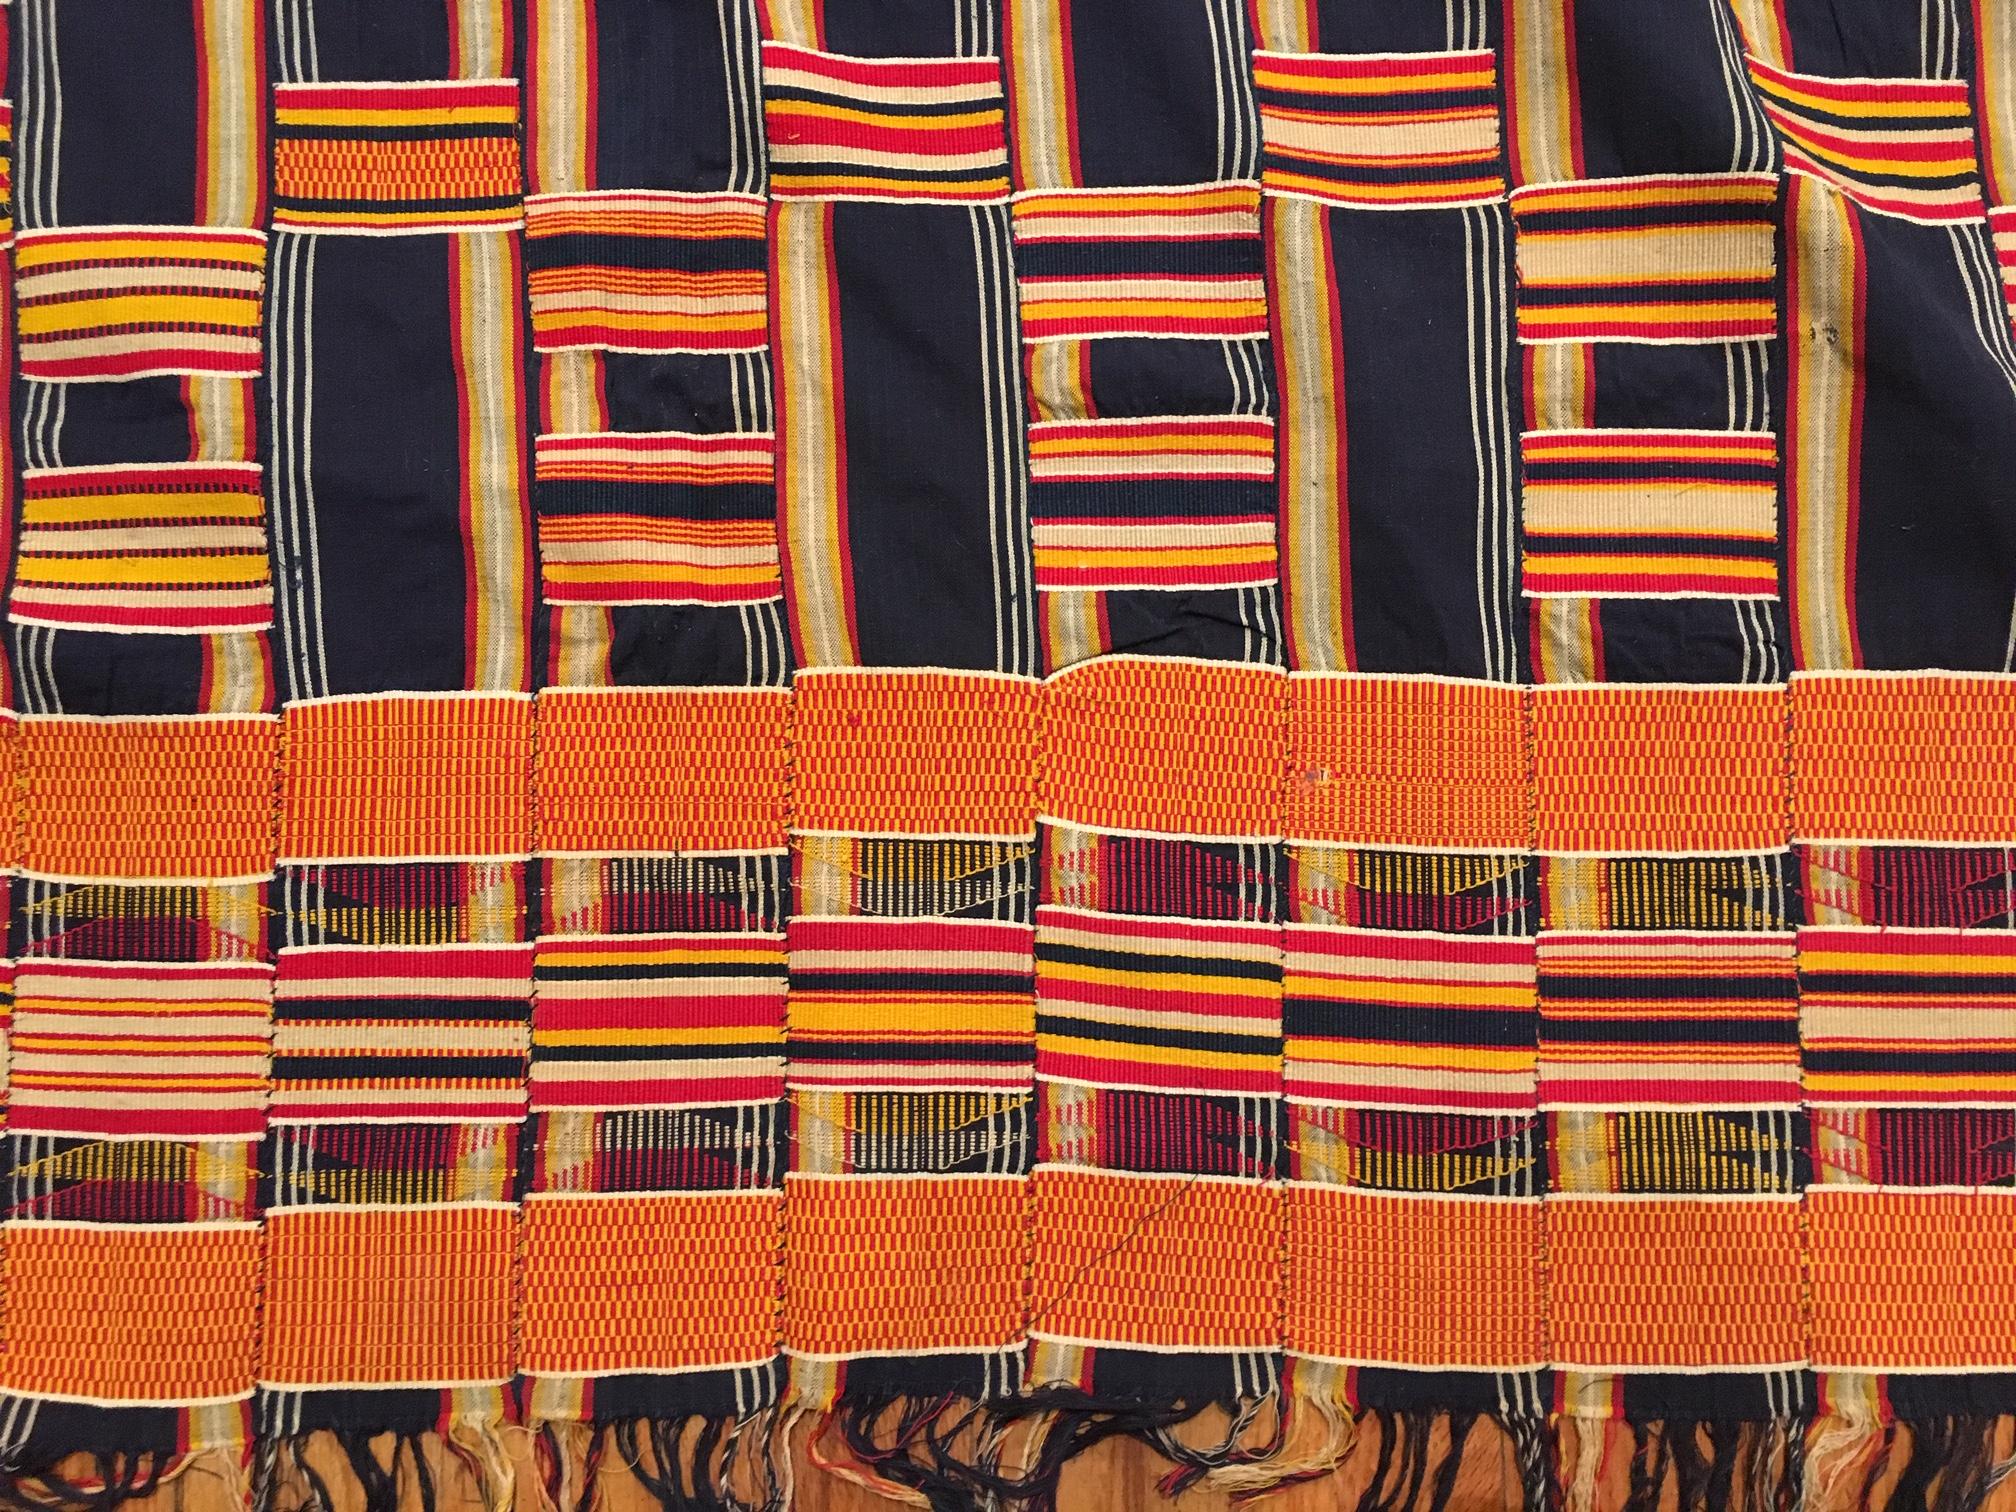 Cotton Antique African Ewe Kente Textile. Size: 5 ft 9 in x 8 ft 7 in (1.75 m x 2.62 m)